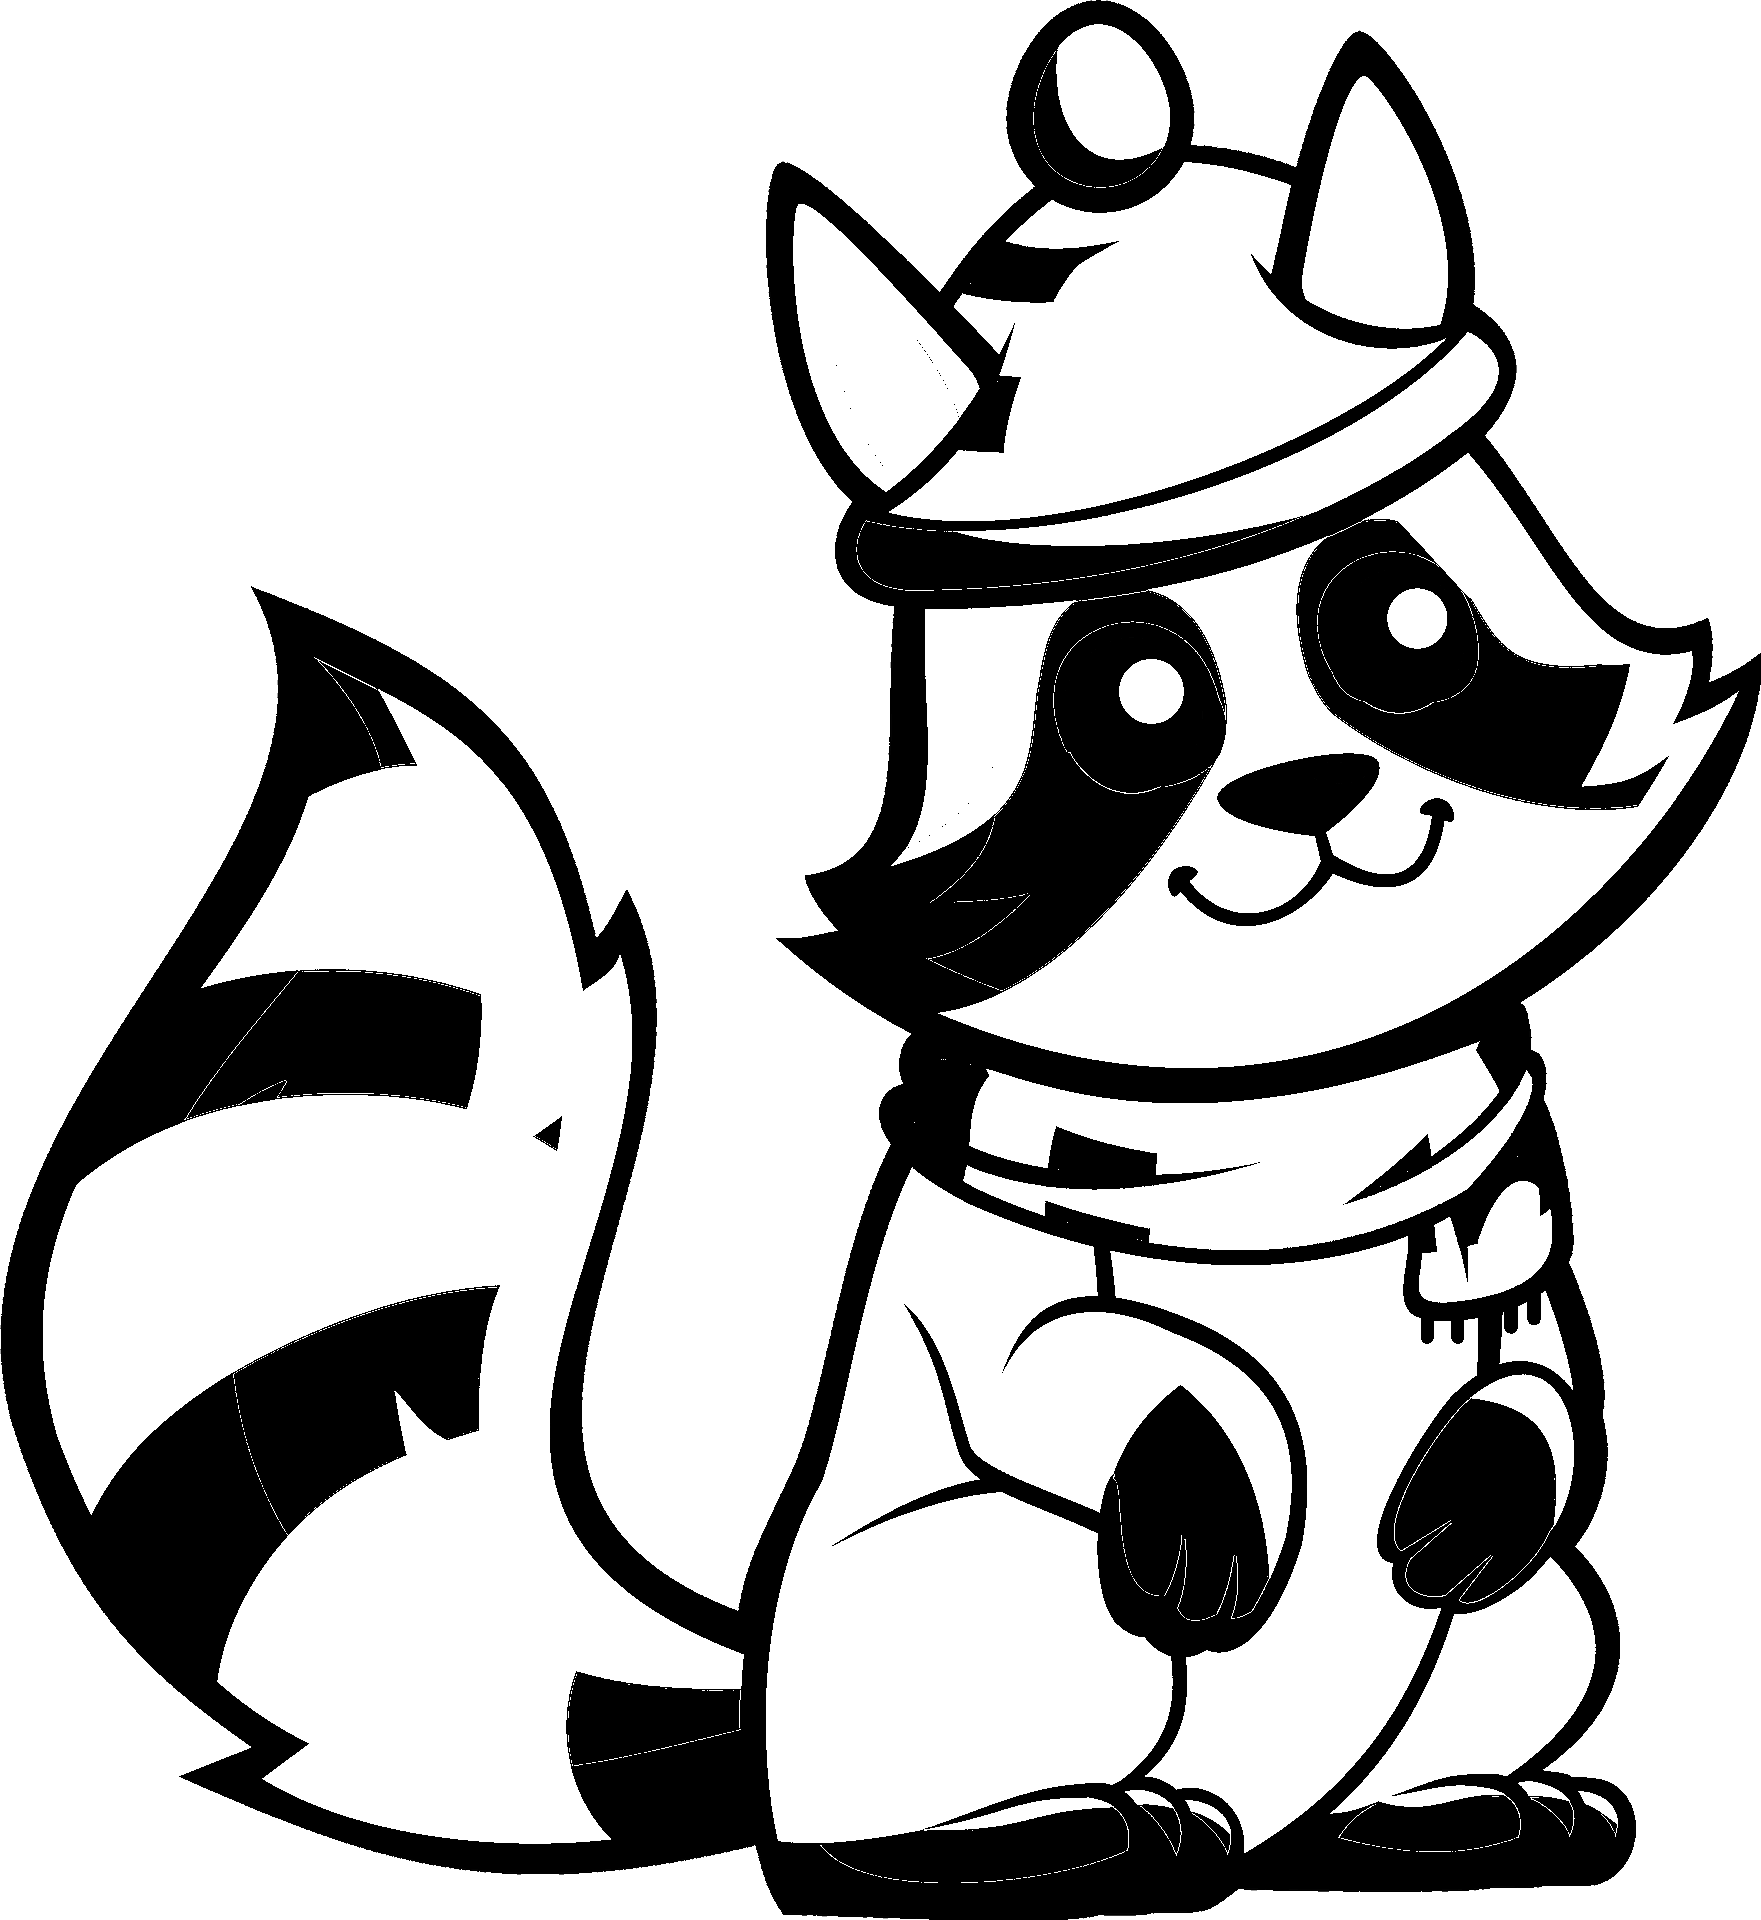 Coloring page of a raccoon